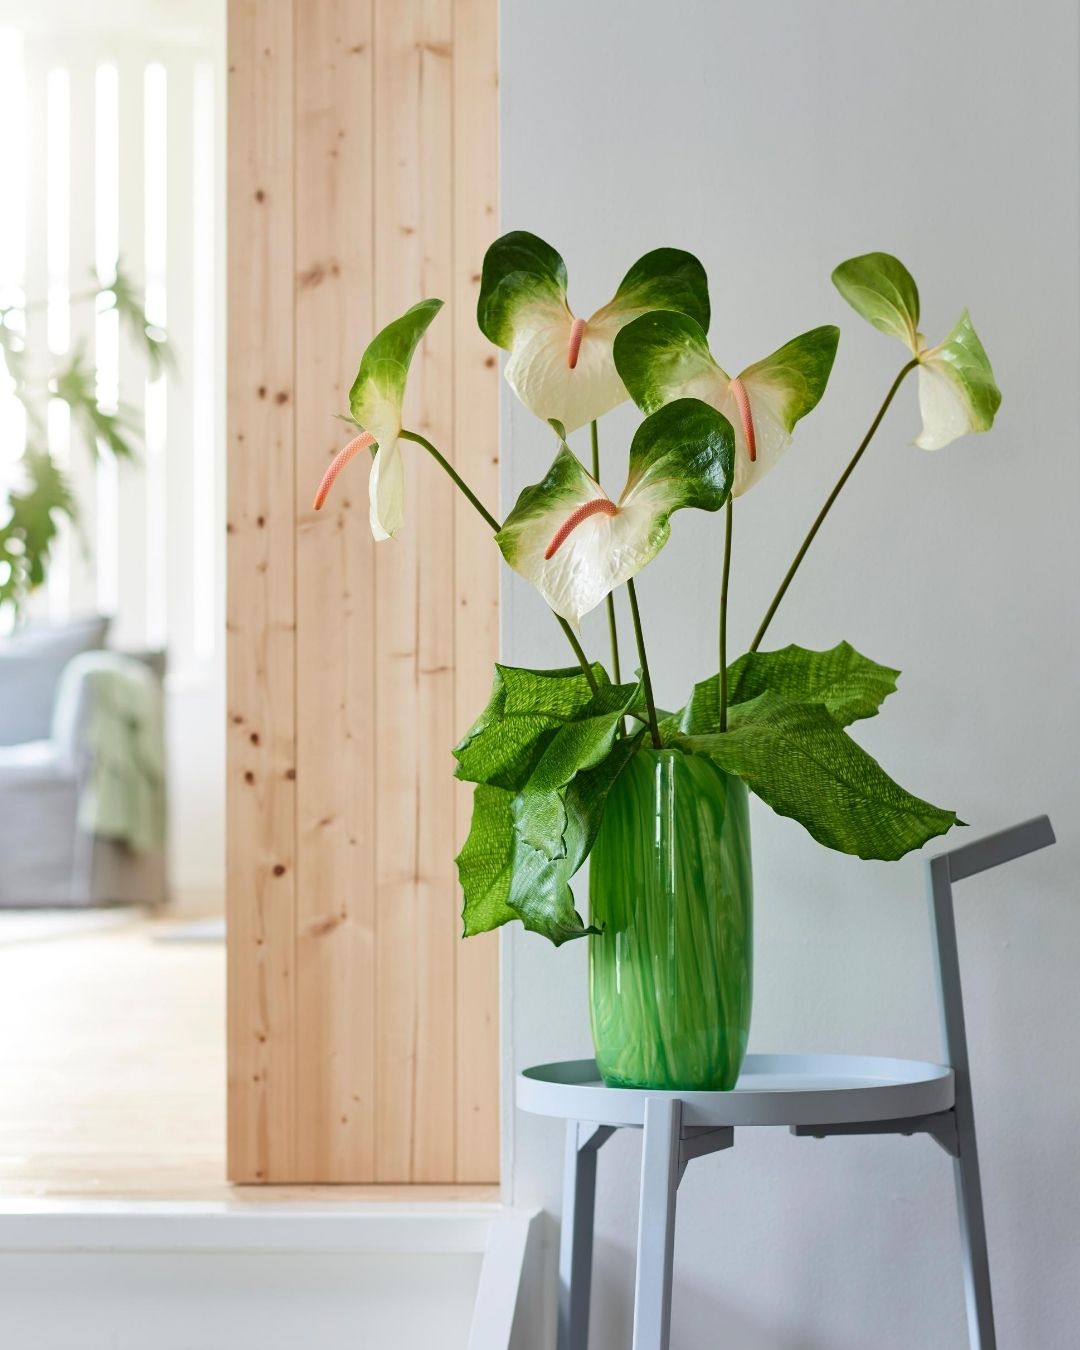 Here are the newest Anthurium plants and flowers